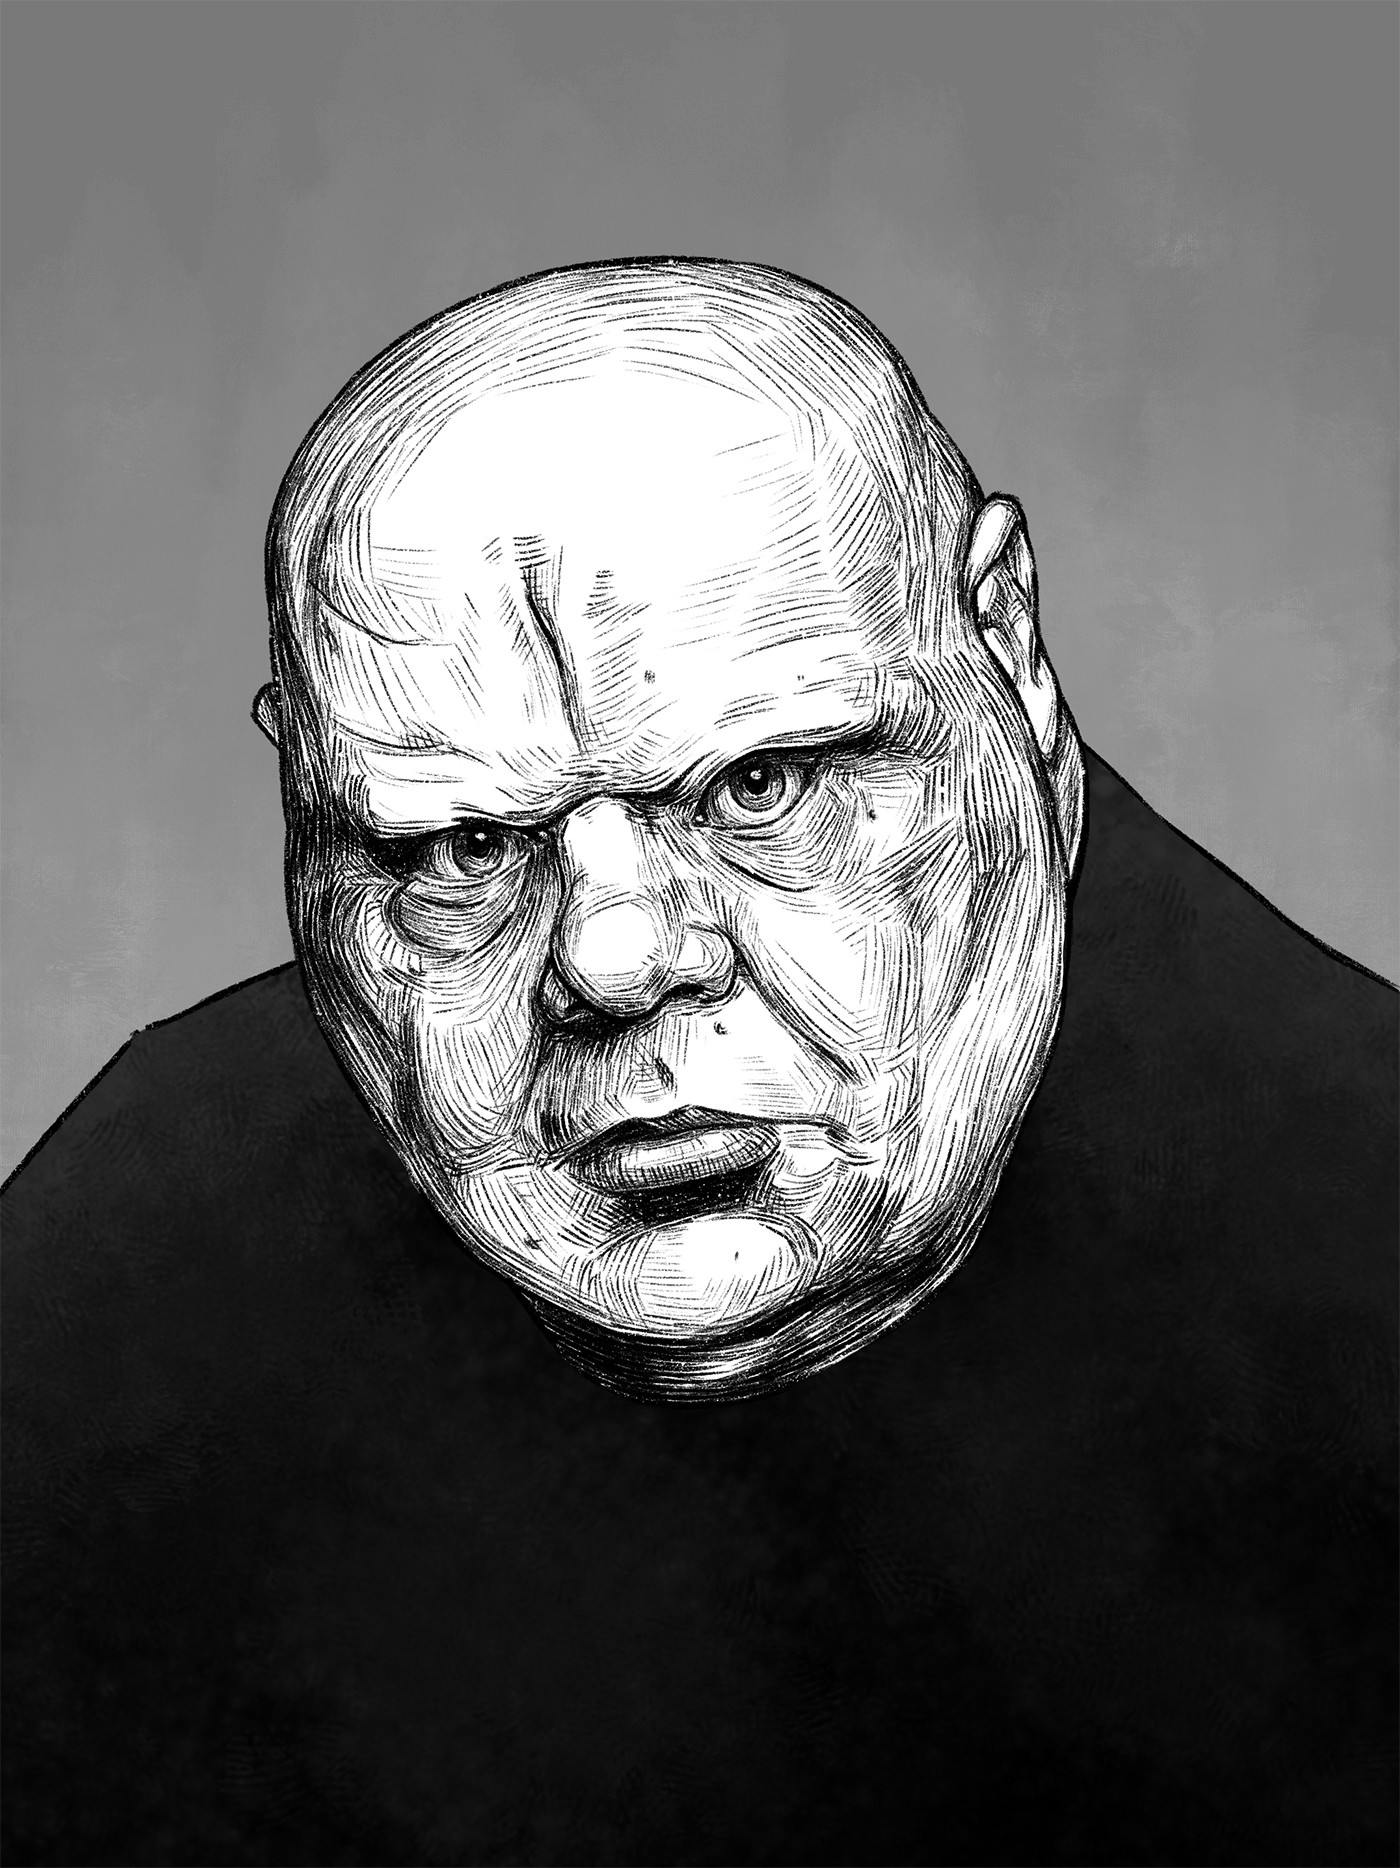 A portrait of a bald man looking intensely at the viewer drawn with dry ink hatching, in black and white.